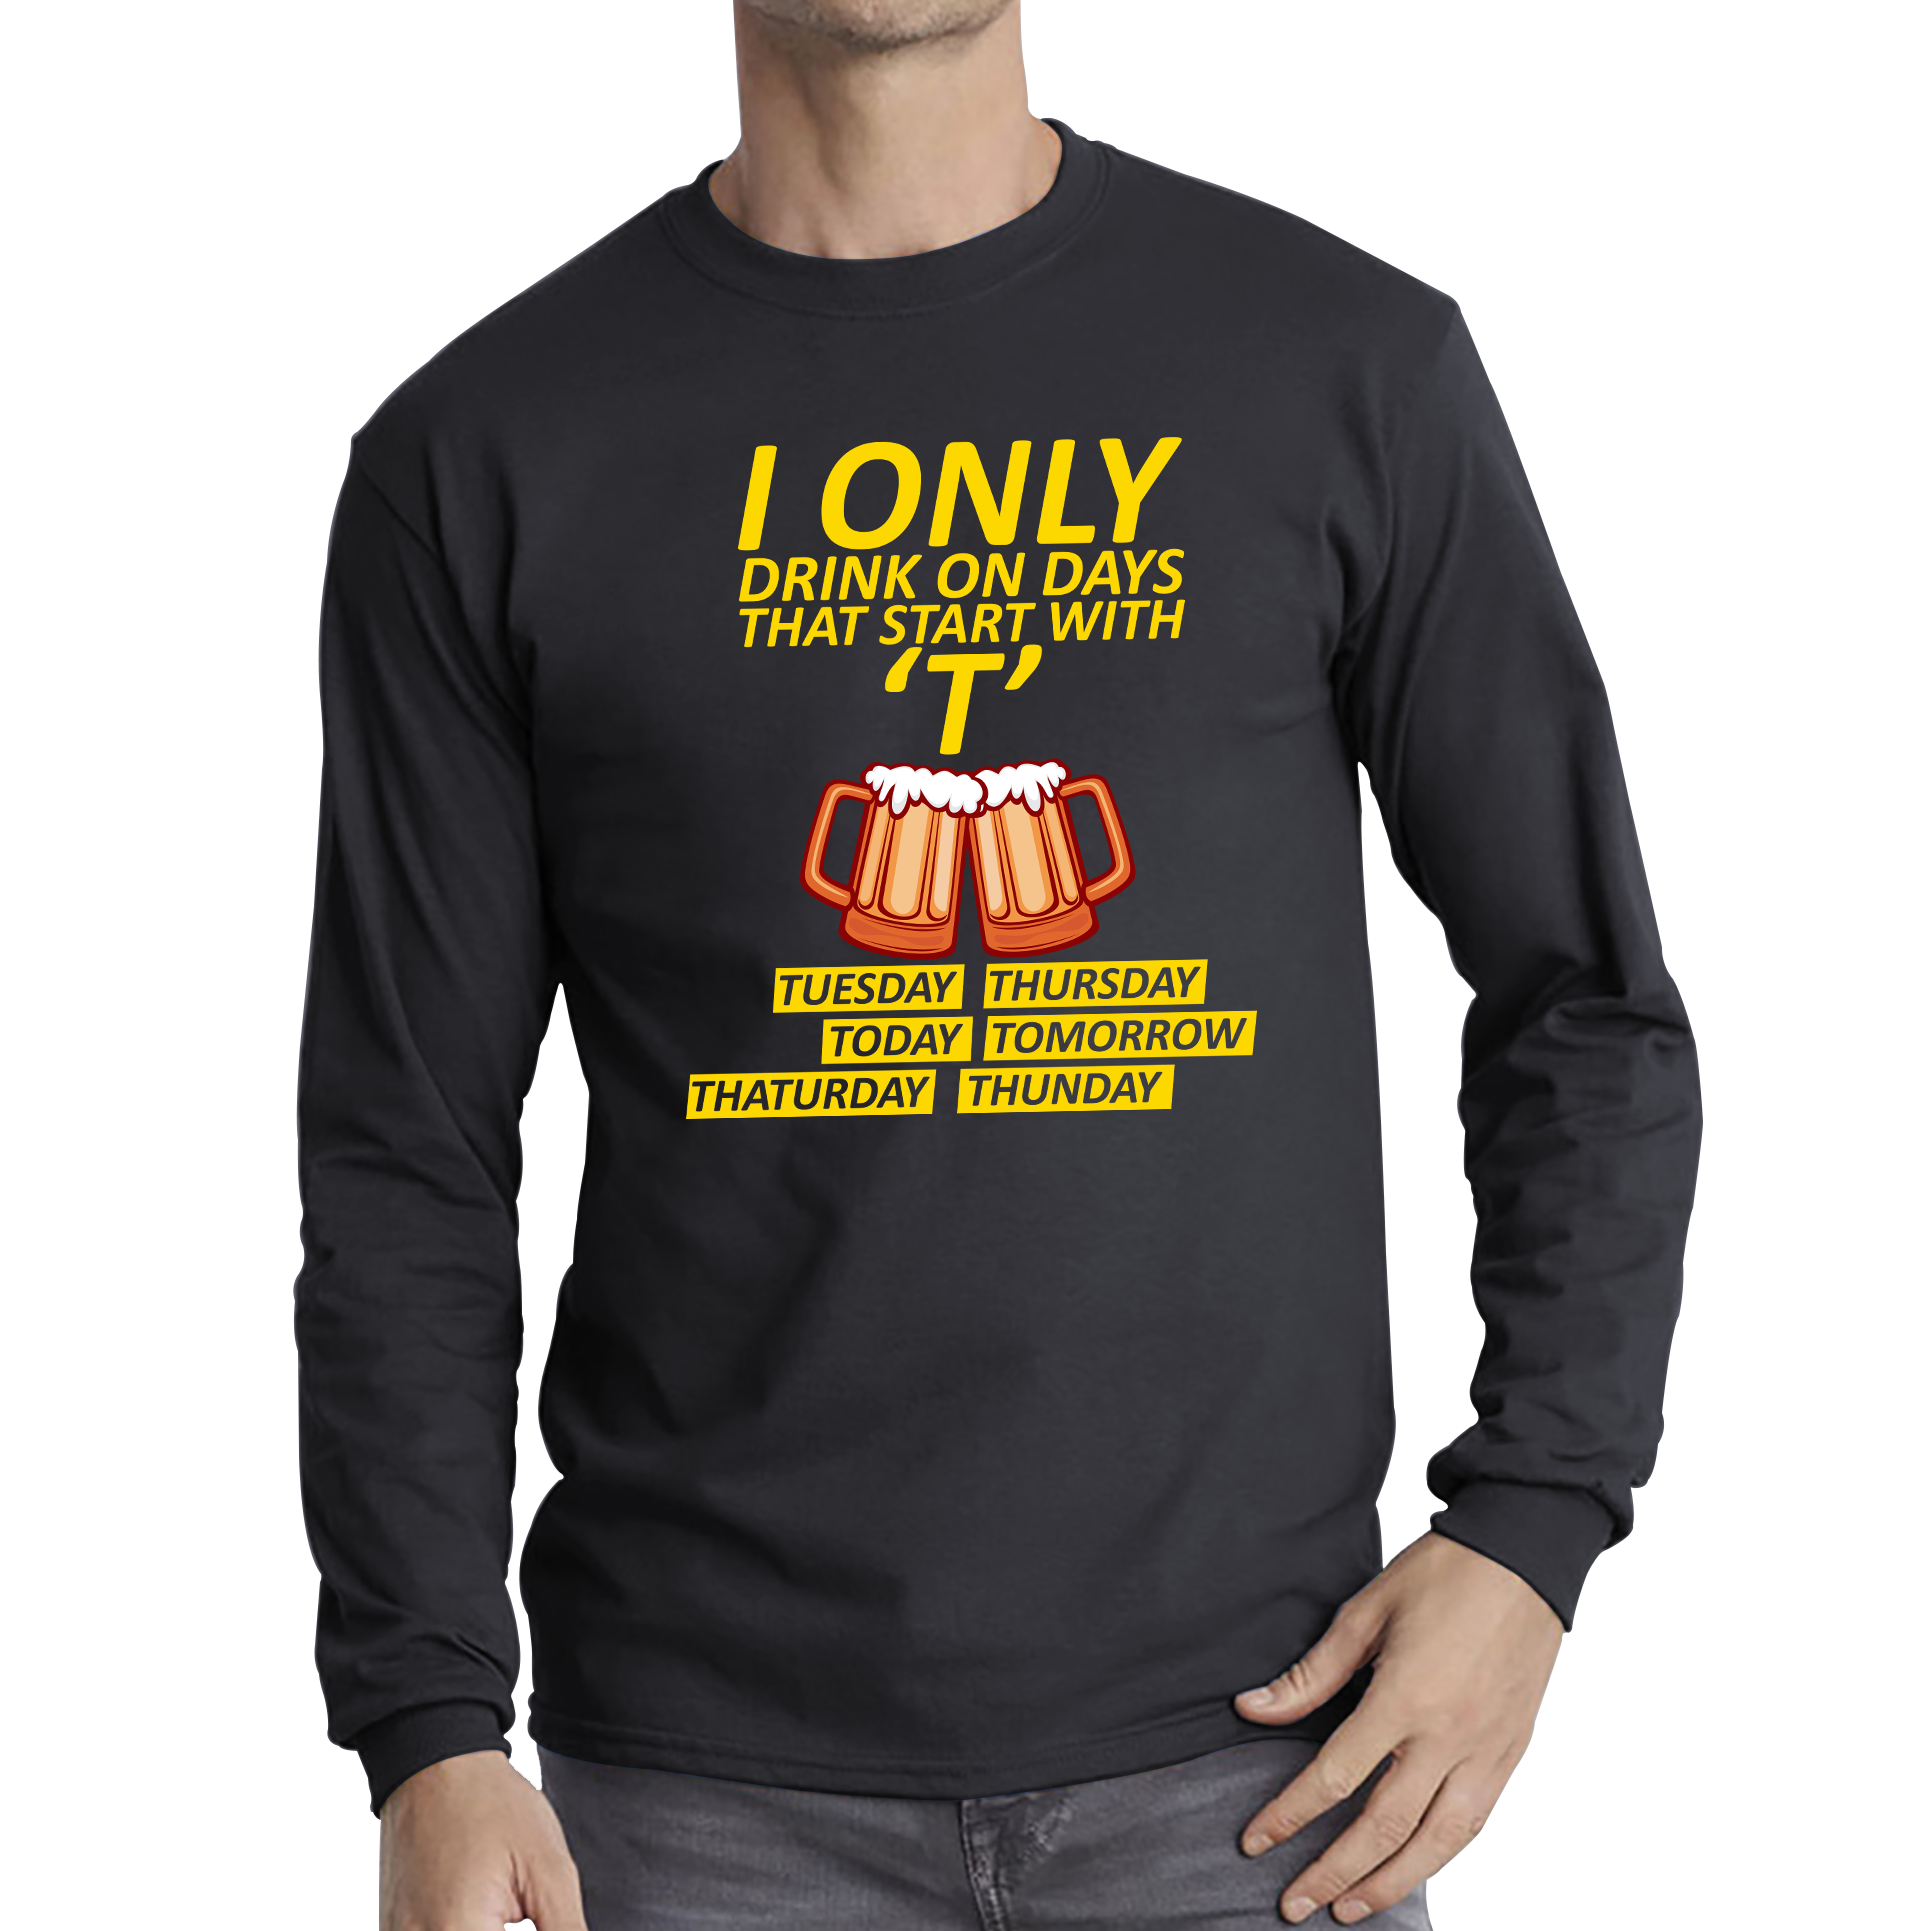 I Only Drink On Days That Start With T, Tuesday, Thursday, Today, Tomorrow, Thaturday, Thunday Adult Long Sleeve T Shirt